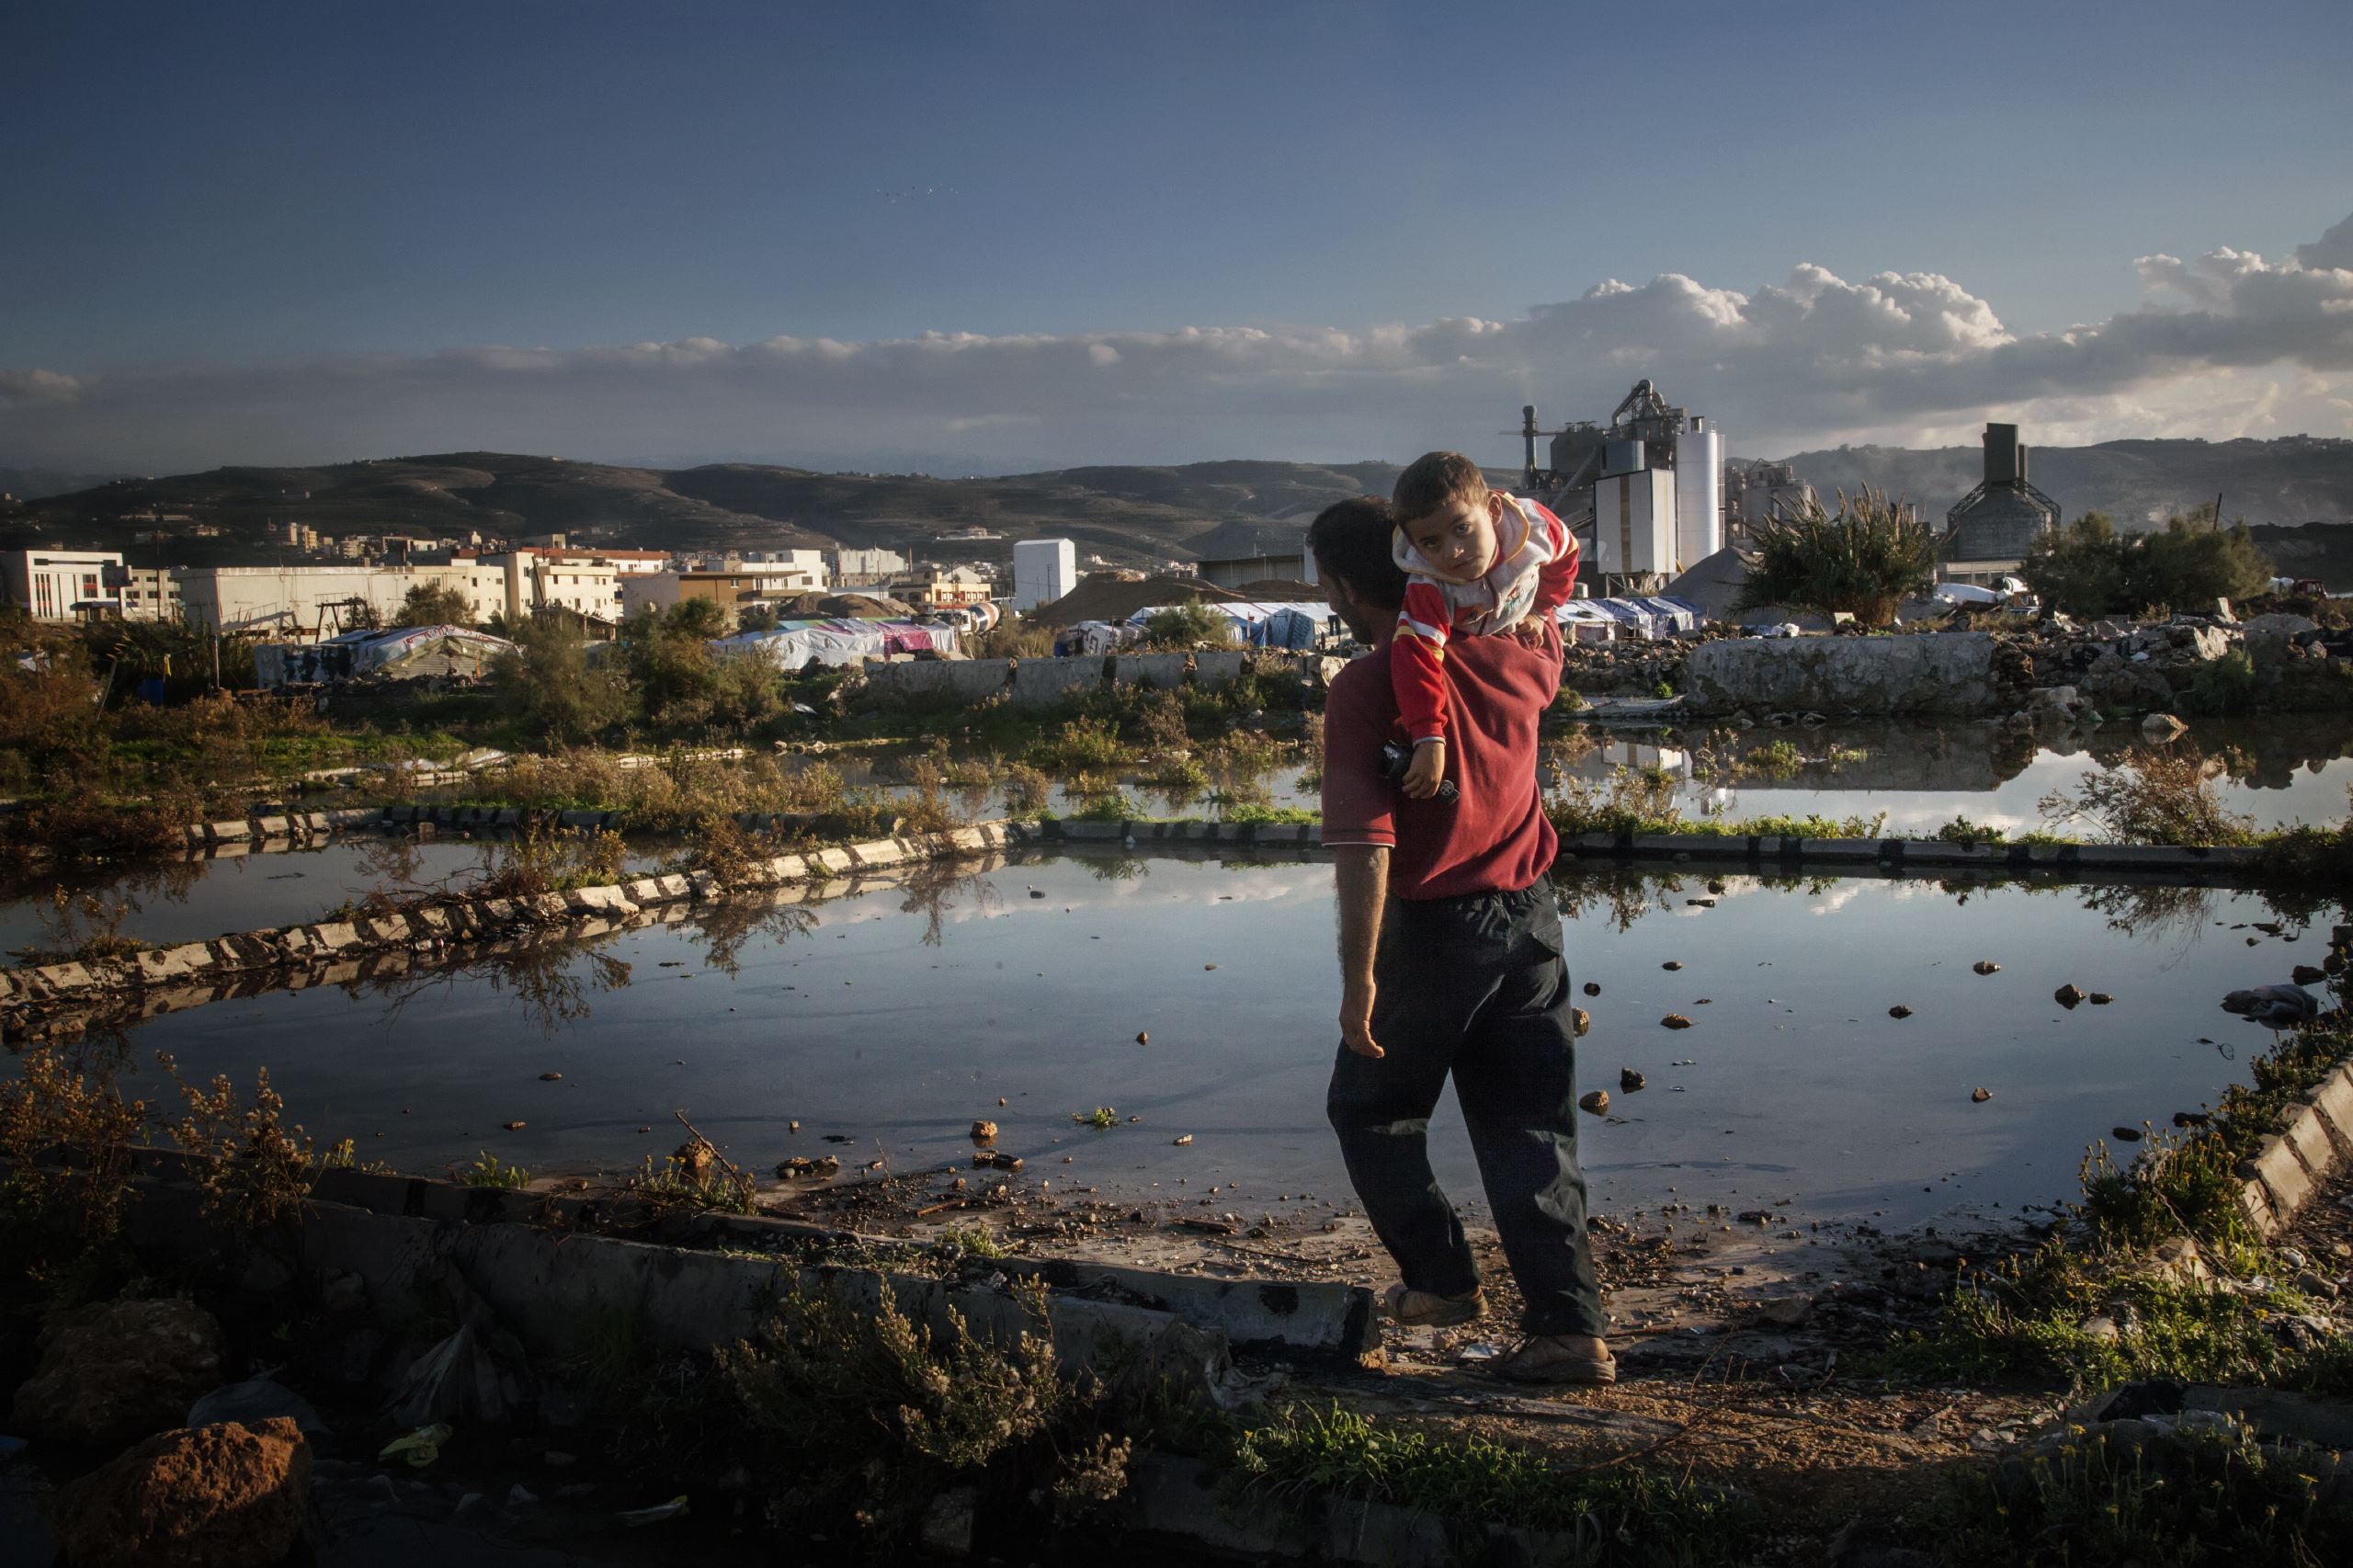 A father with his son in the informal refugee camp in Enfe, a suburb of Tripoli, Lebanon, Nov. and Dec. 2014.